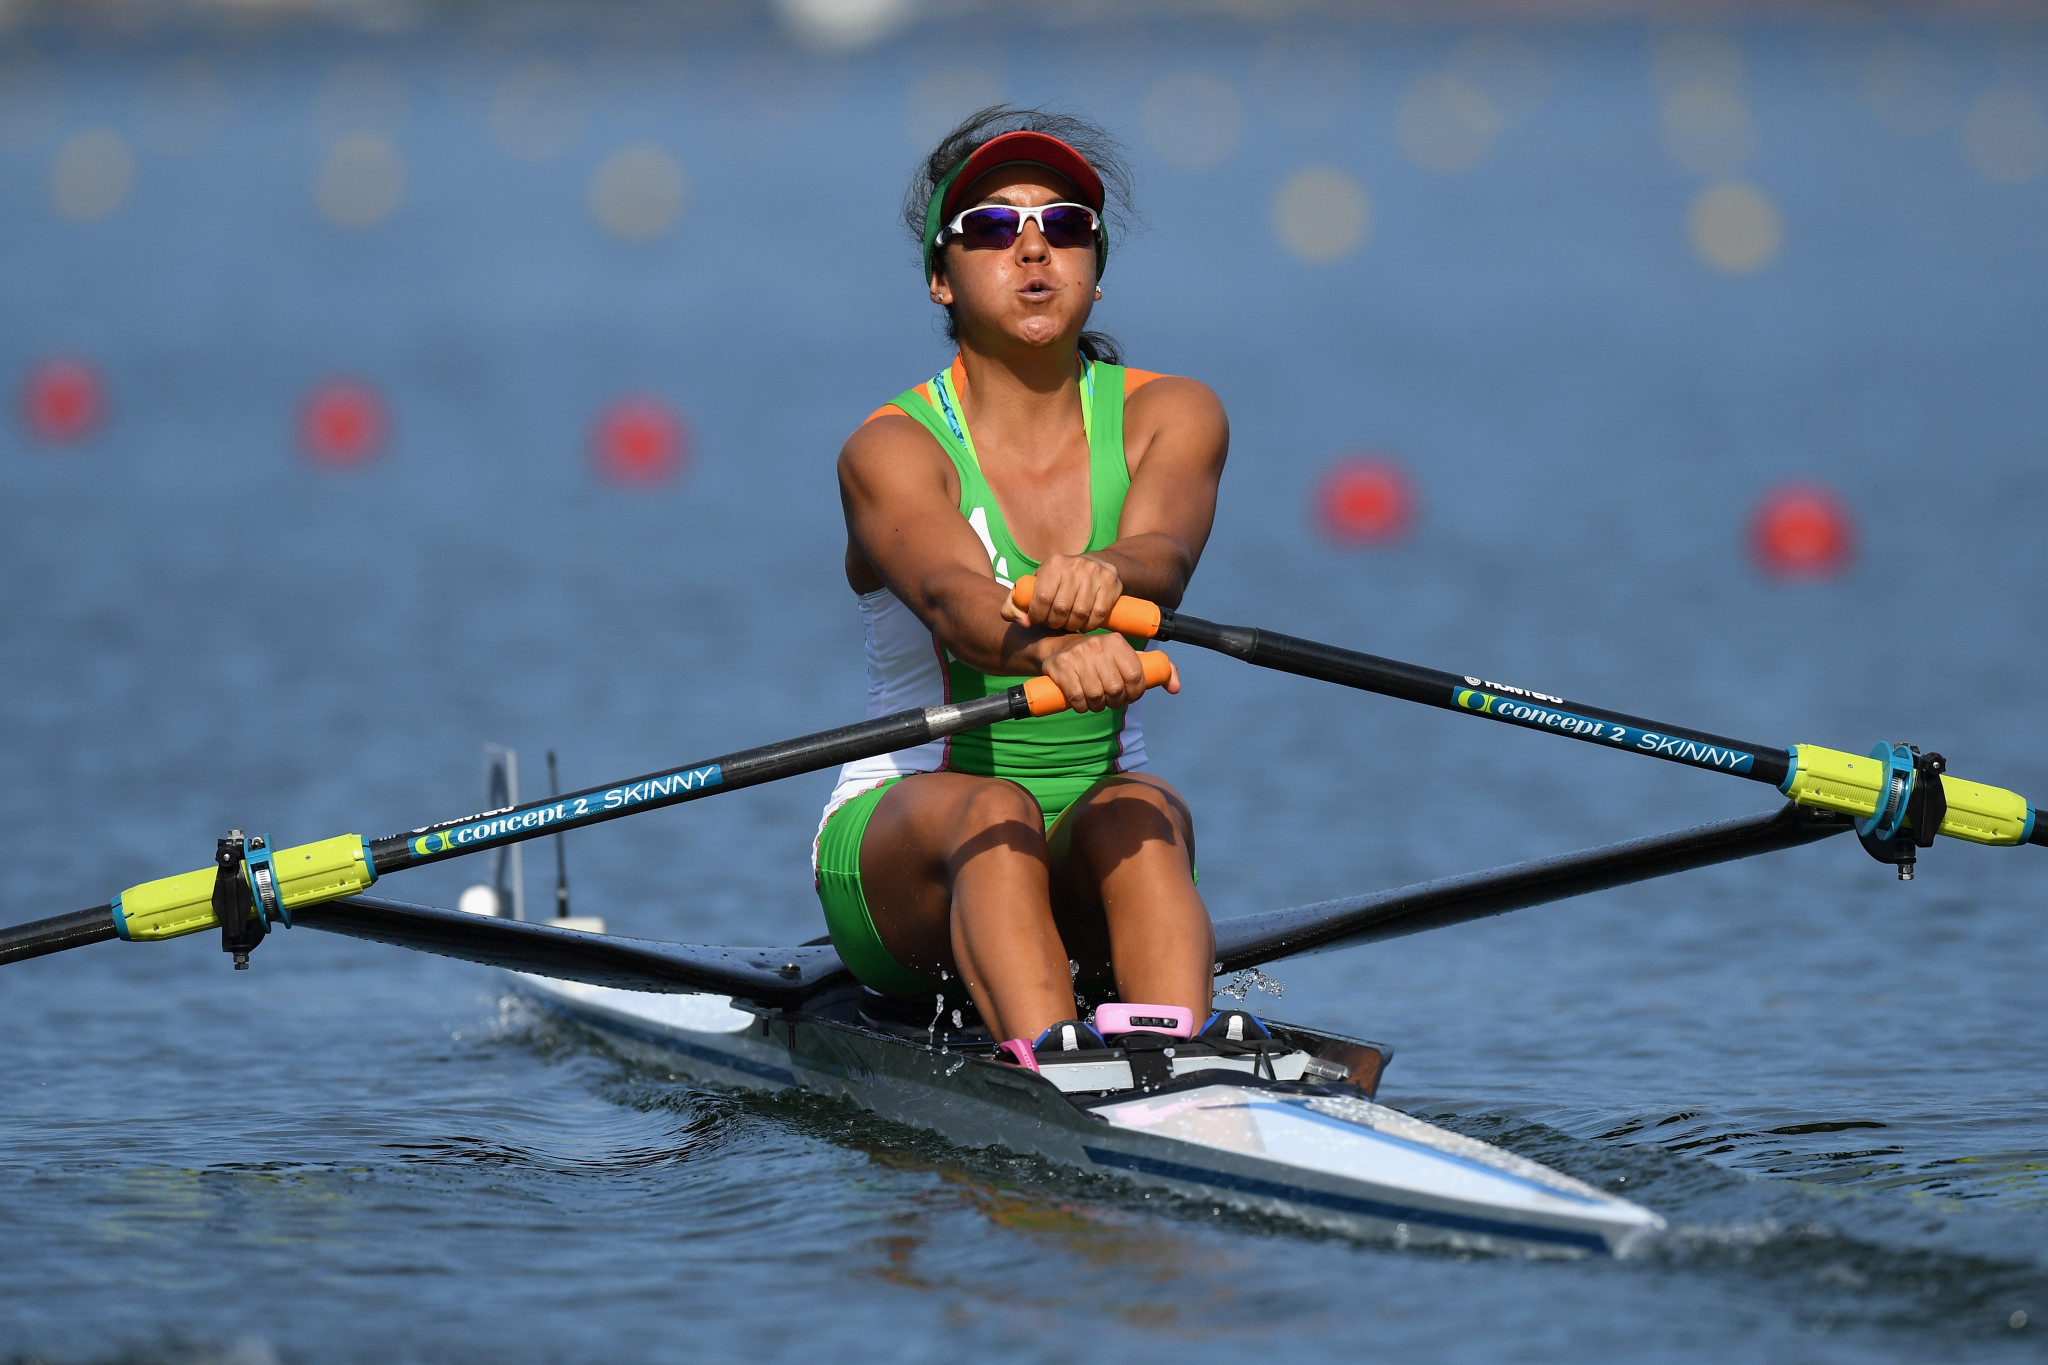 Americas Olympic and Paralympic rowing qualifier finished ahead of schedule as new COVID-19 restrictions imposed in Rio